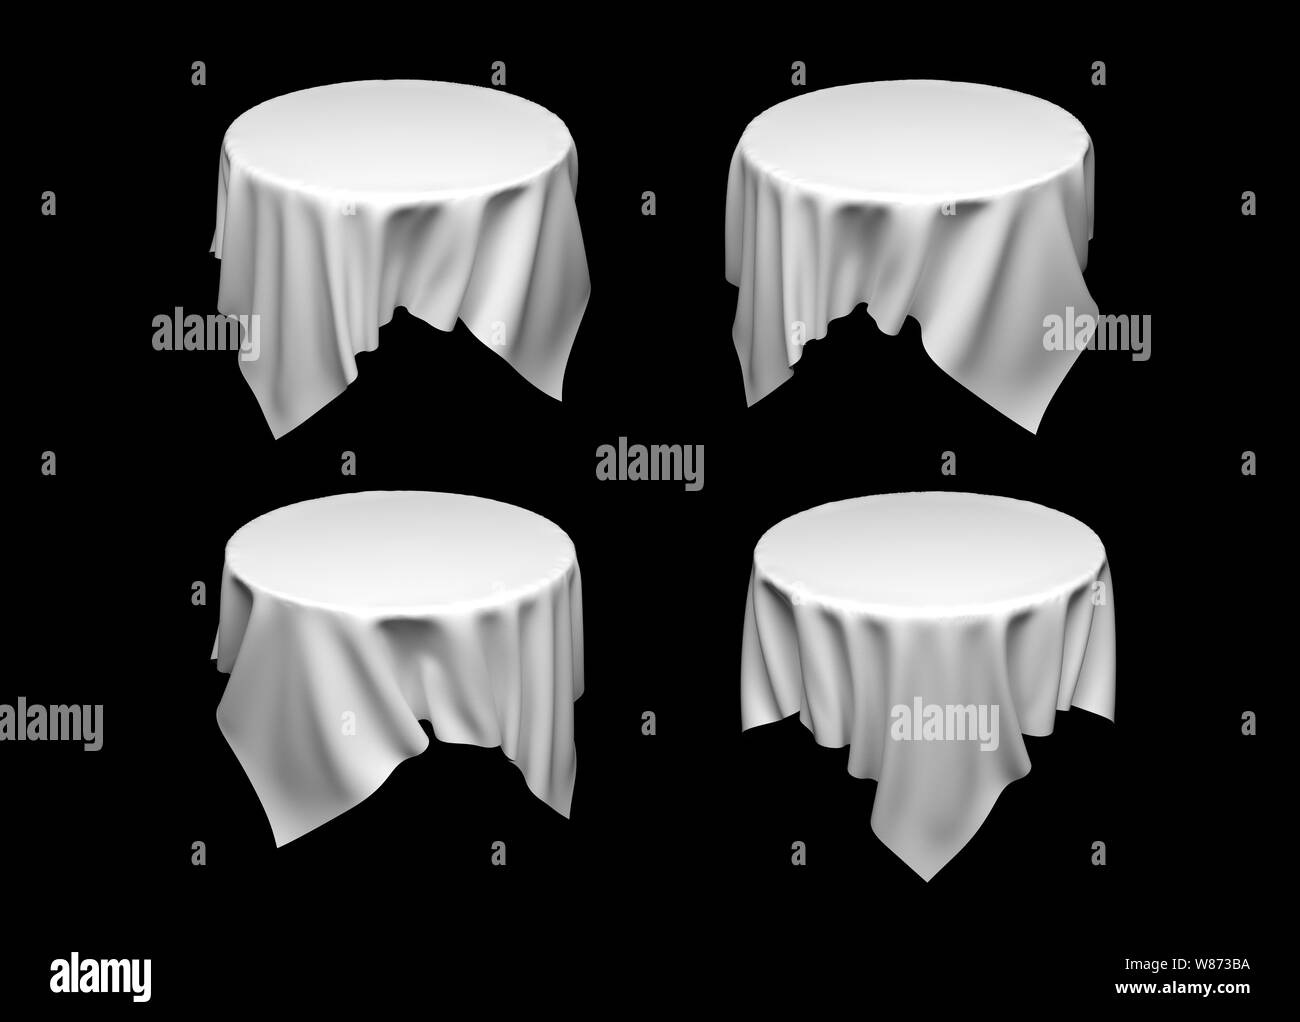 White tablecloth on invisible round table. Set of different cloths on black background Stock Photo